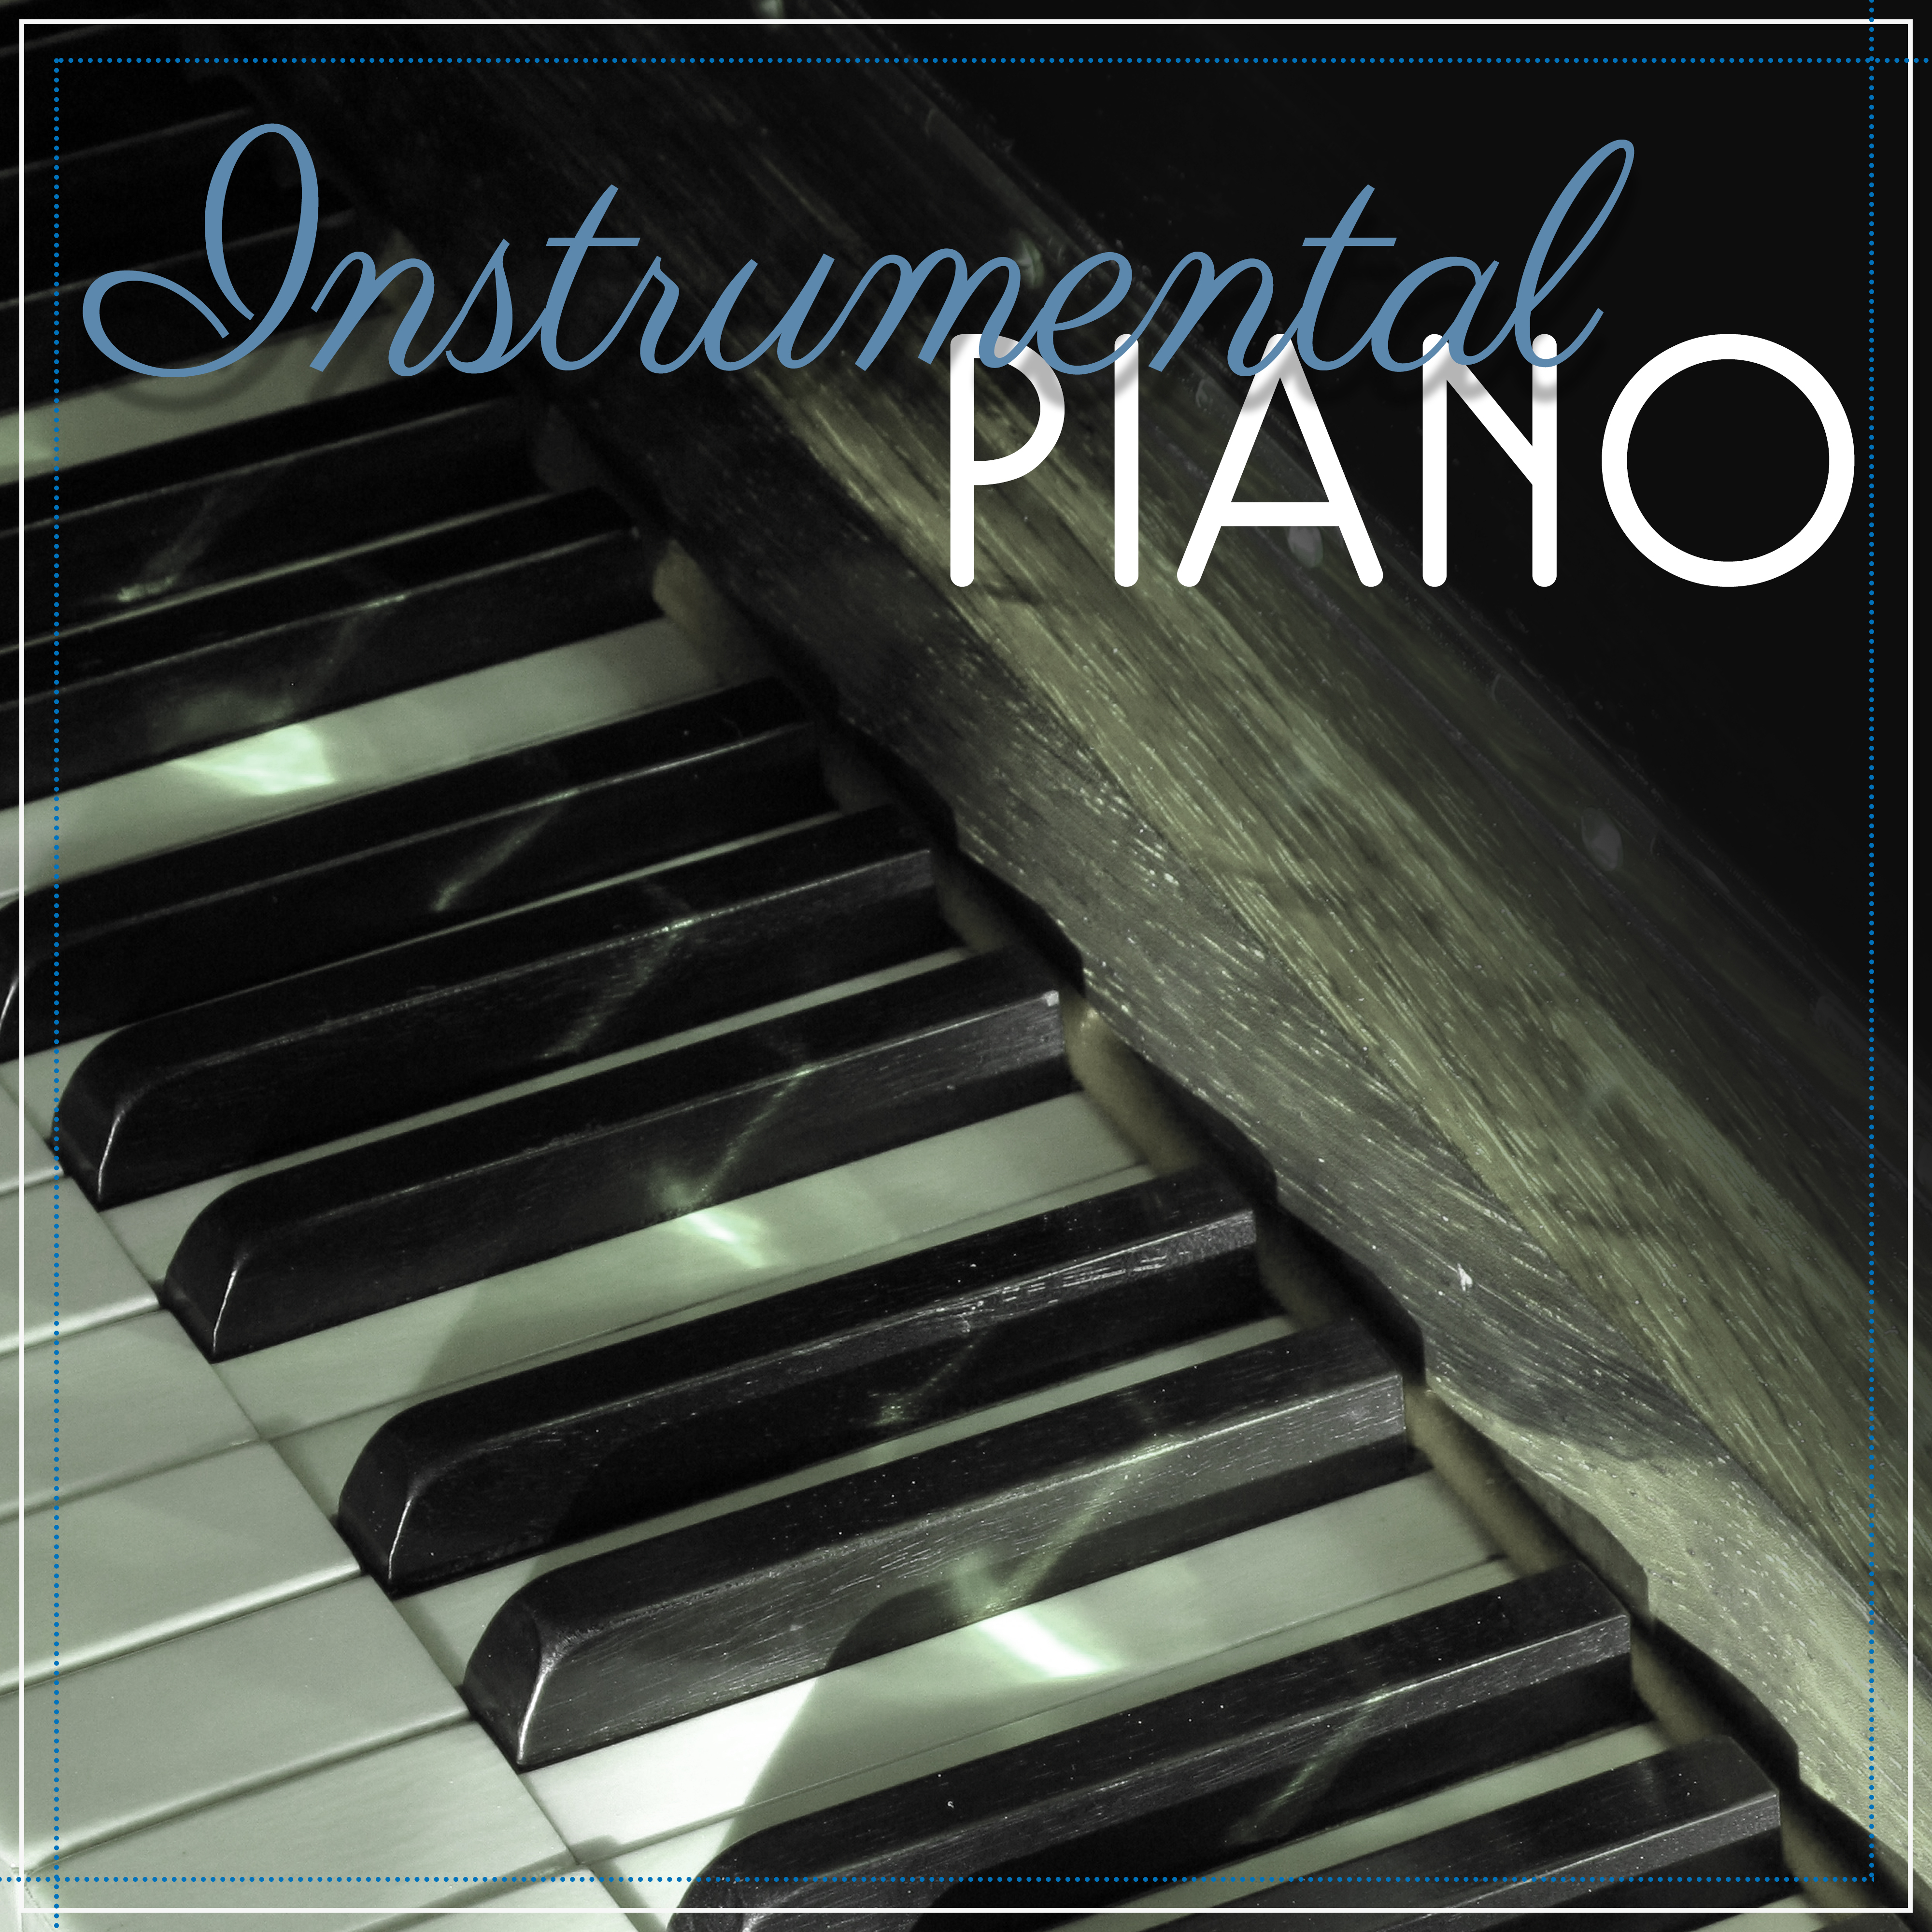 Instrumental Piano – Classical Music for Relaxation, Calming Sounds, Deep Rest, Franz Joseph Haydn